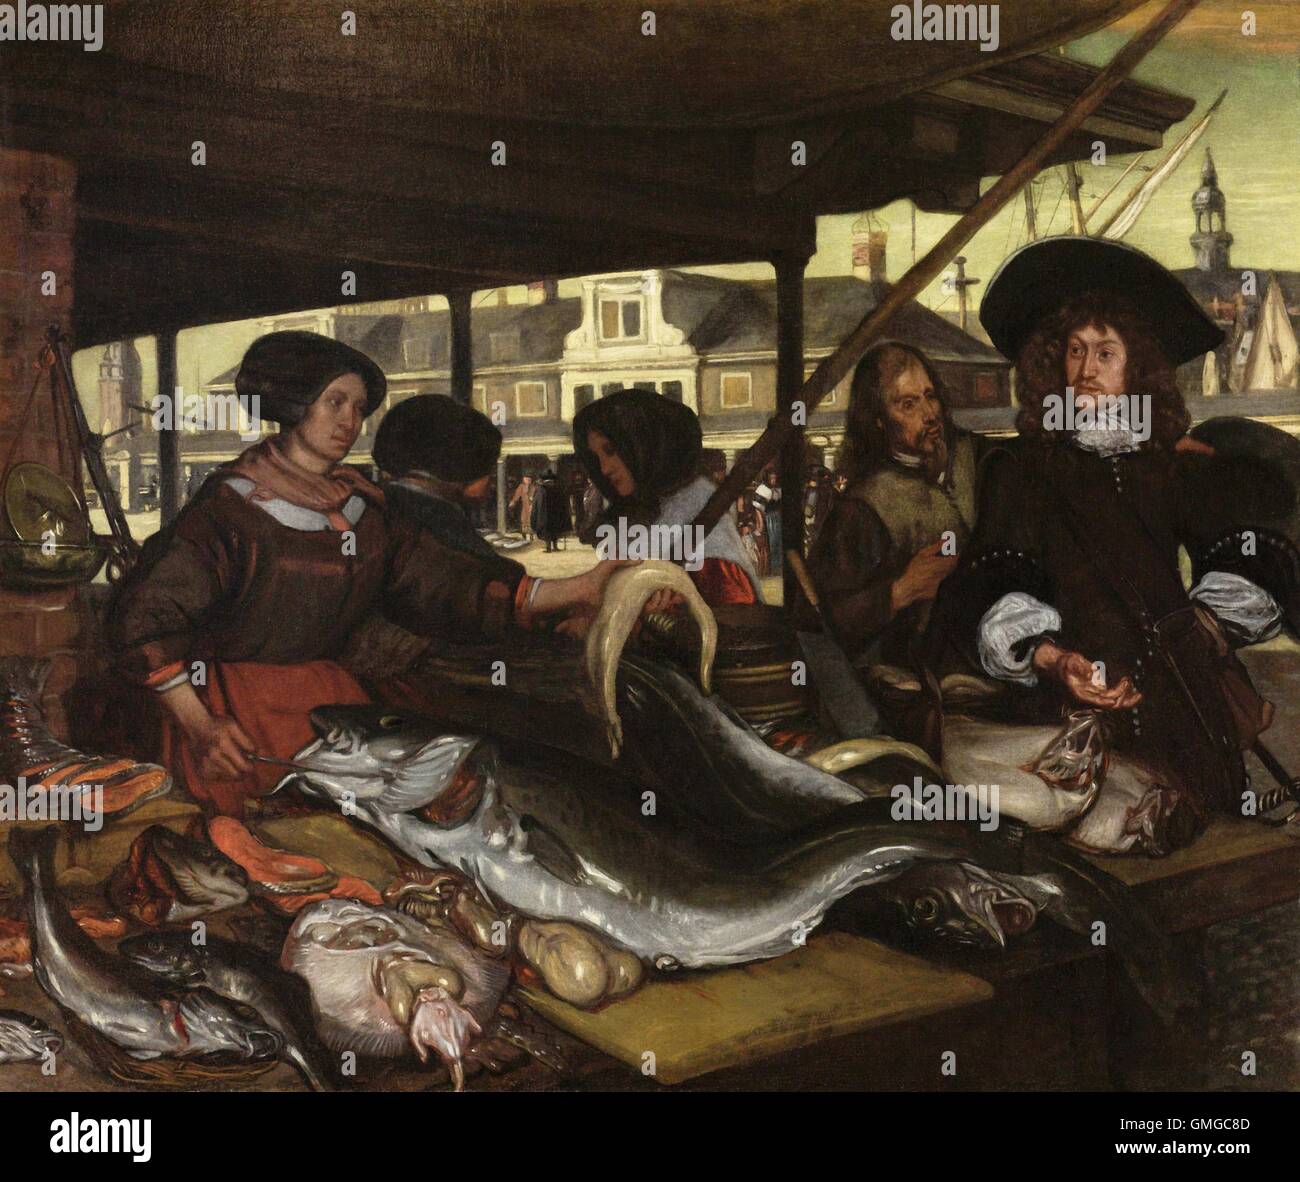 New Fish Market in Amsterdam, by Emanuel de Witte, 1655-92, Dutch painting, oil on canvas. Women vendors in a stall sell an abundant variety of types and sizes (BSLOC 2016 3 182) Stock Photo